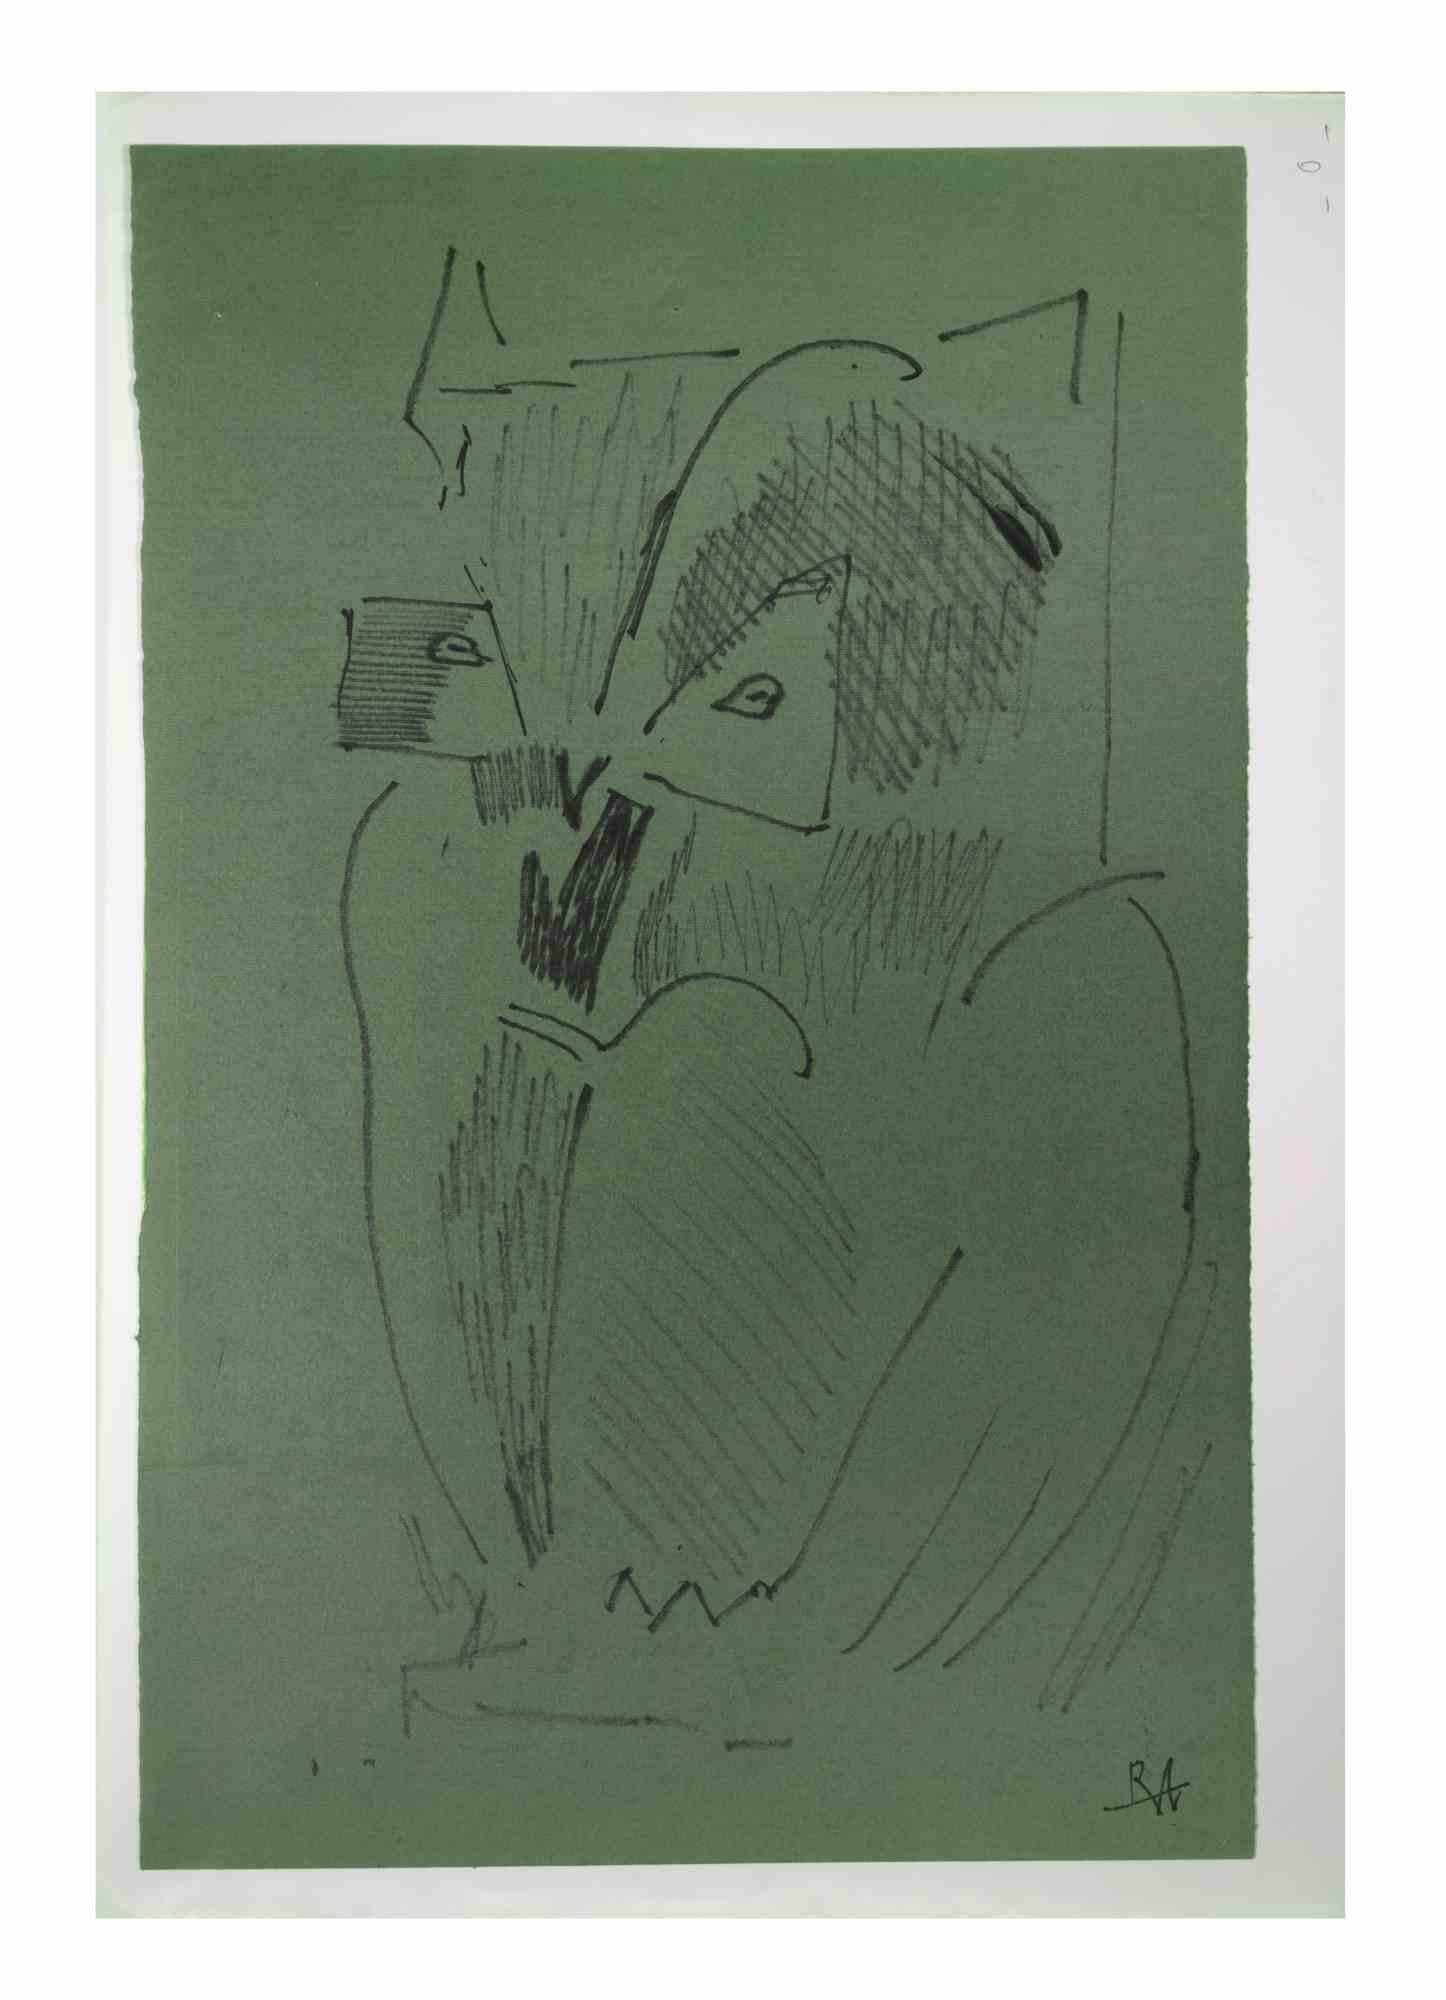 Owl is a black marker drawing realized by Reynold Arnould (Le Havre 1919 - Parigi 1980).

Good condition on a green paper, included a white cardboard passpartout (55x37.5 cm).

Monogrammed on the lower right corner.

Reynold Arnould was born in Le